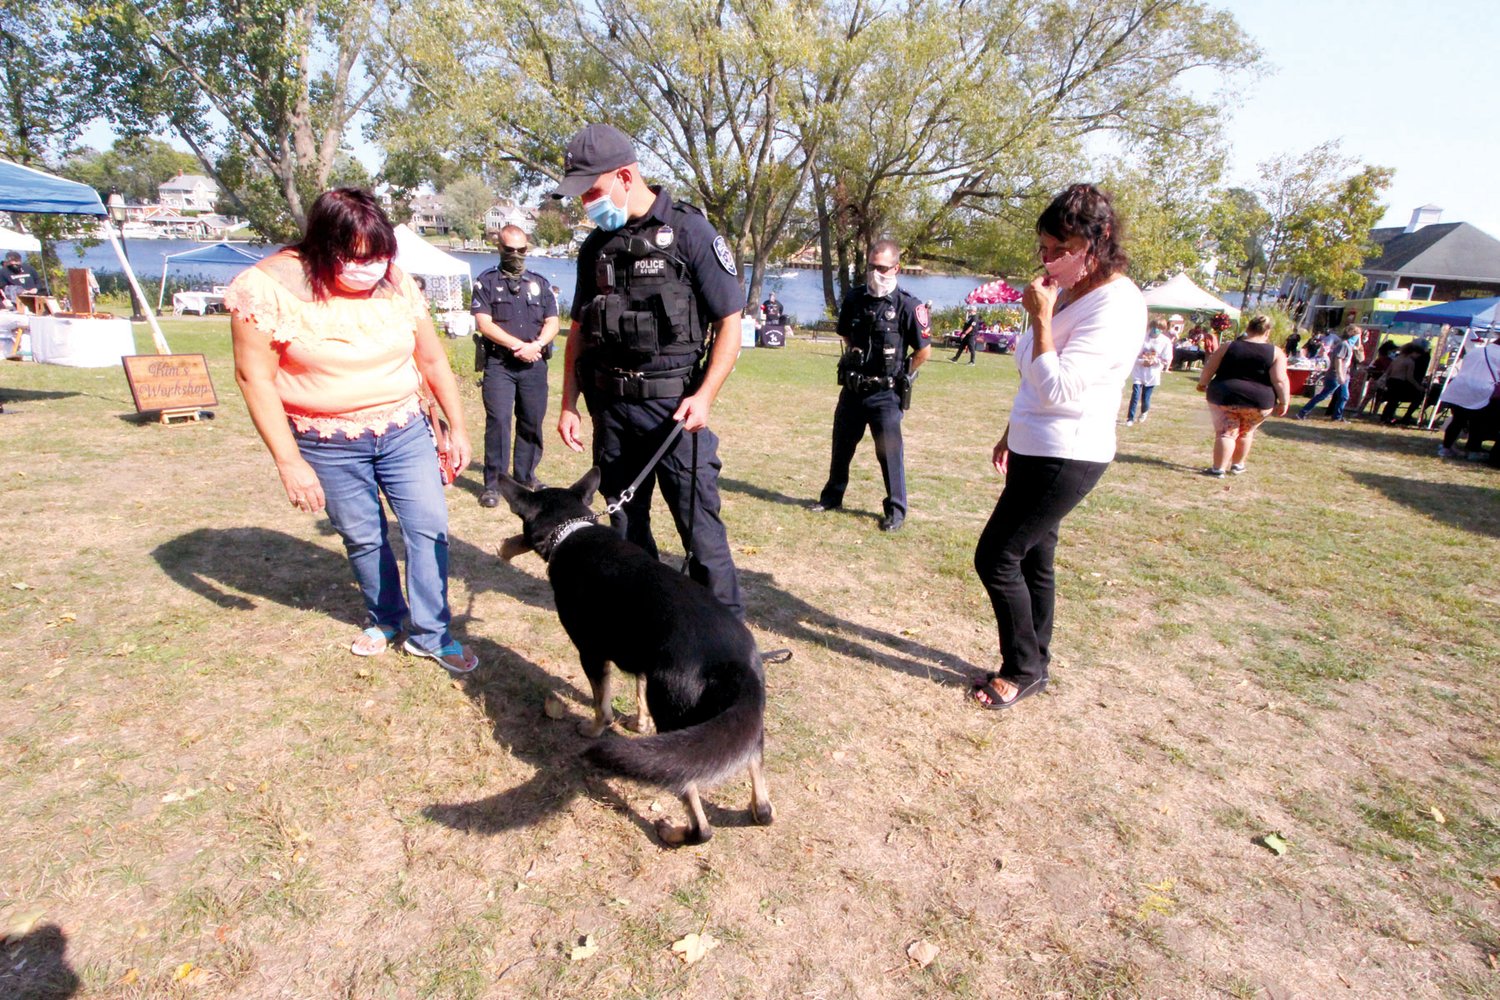 FRIENDLY K-9: Officer Tim Lipka introduces police dog Haki to Olivia Vendettoli and Diane D’Ambra as fellow Warwick officers Ryan Lancaster and Michael Isherwood look on during Saturday’s event. The K-9 unit was the beneficiary of $25 vendor fees to participate in the marketplace.